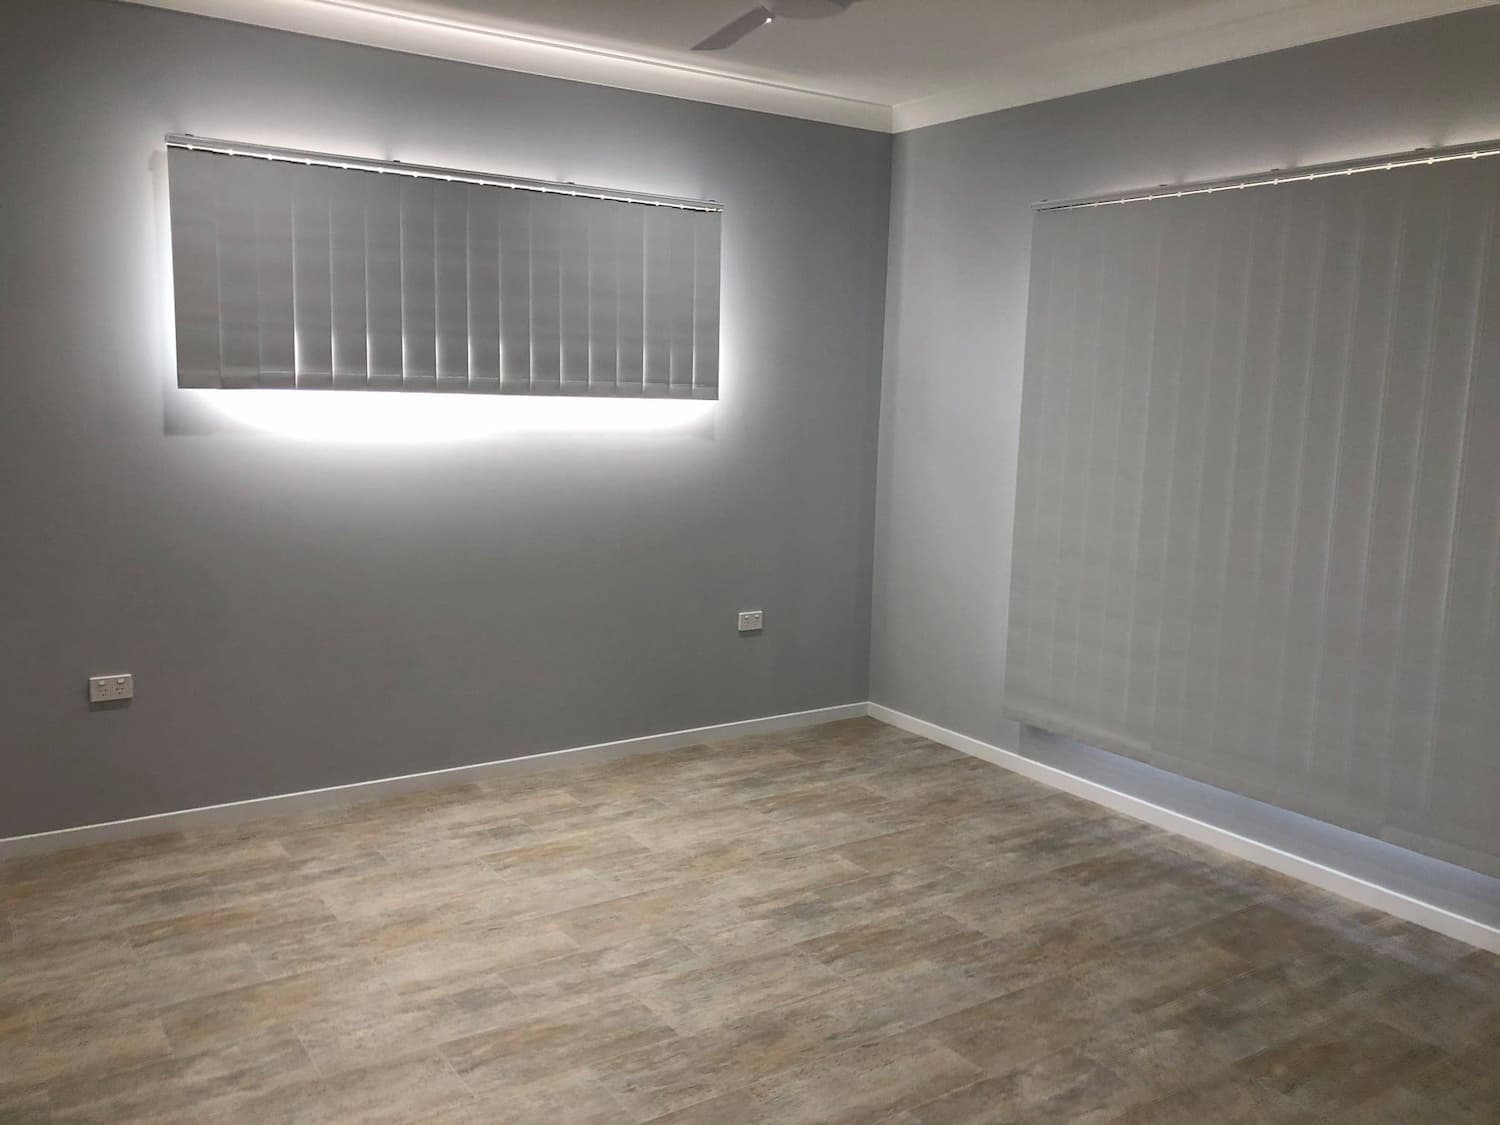 Empty Room - Home & Renovation Builders In Palm Grove, QLD